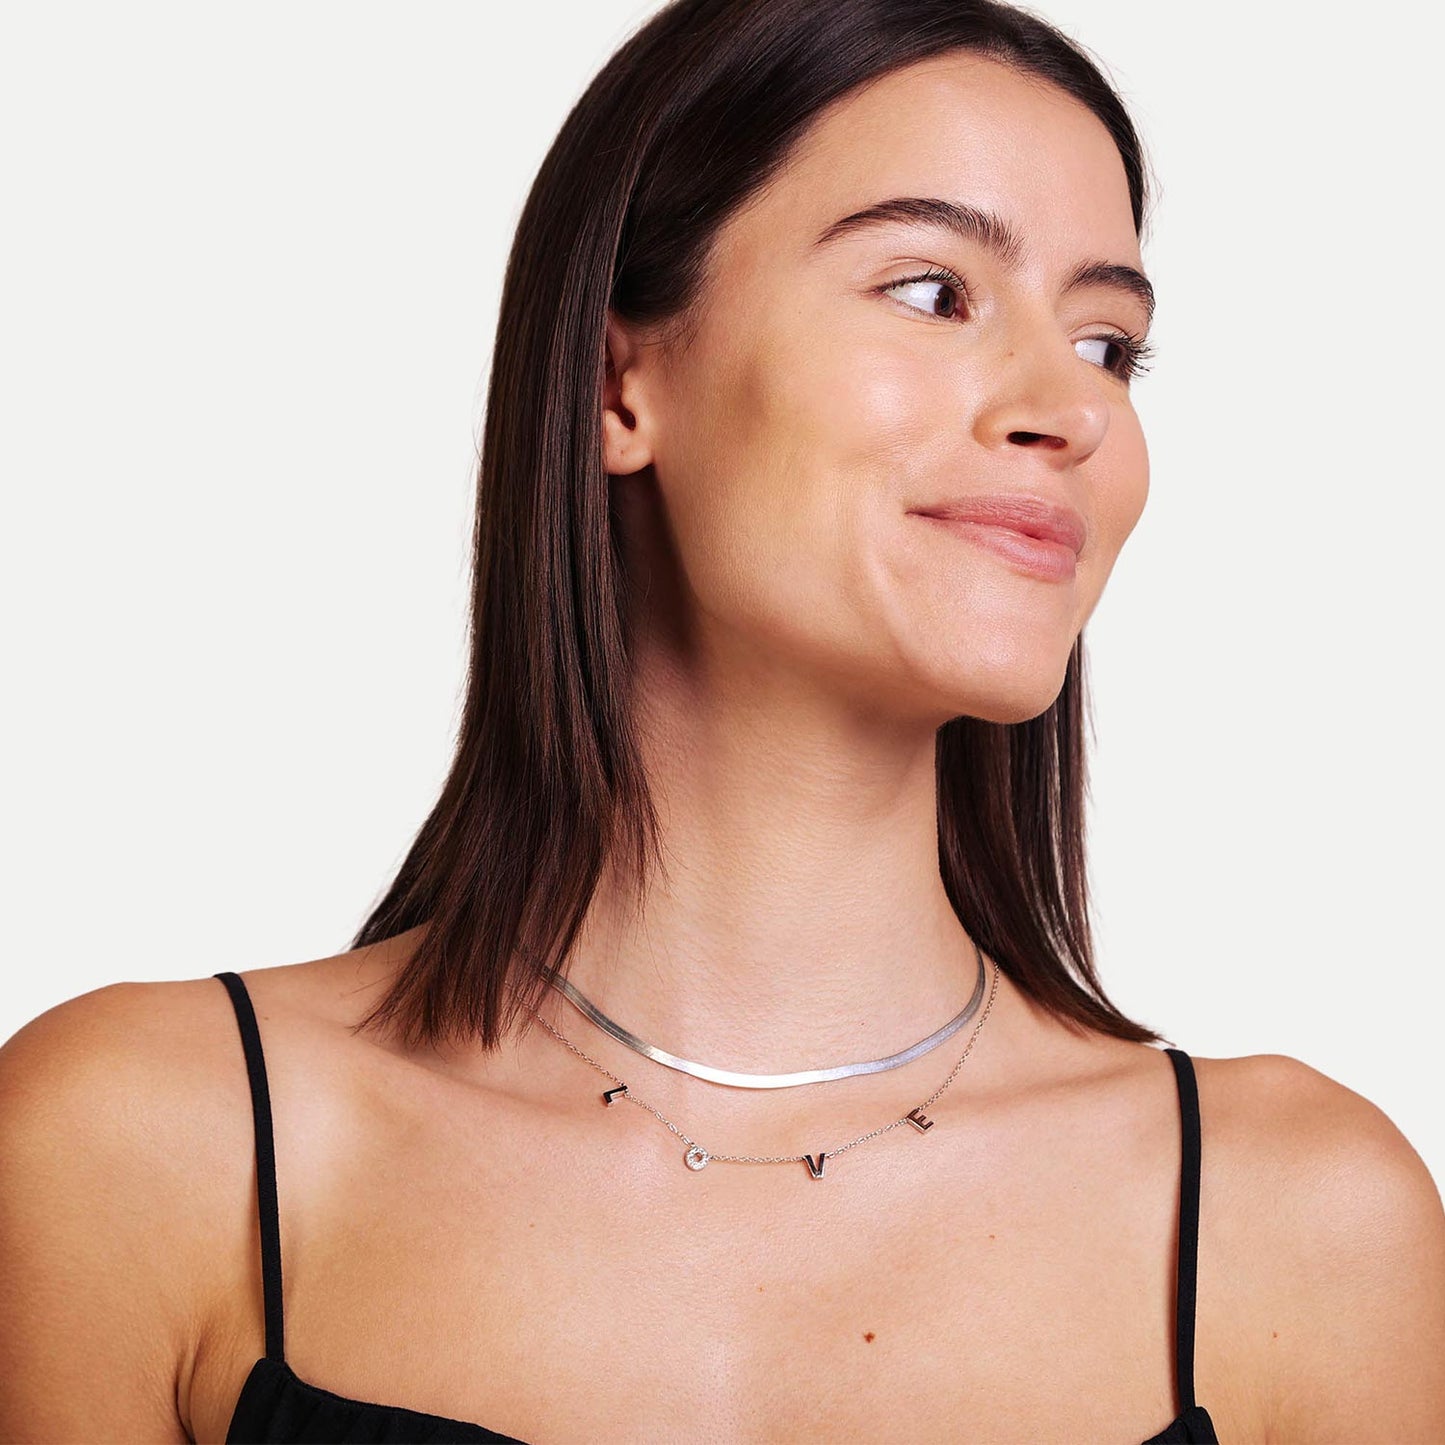 Female Model Wearing Layered Sterling Silver Love Necklace Lily - Playa Luna Jewelry